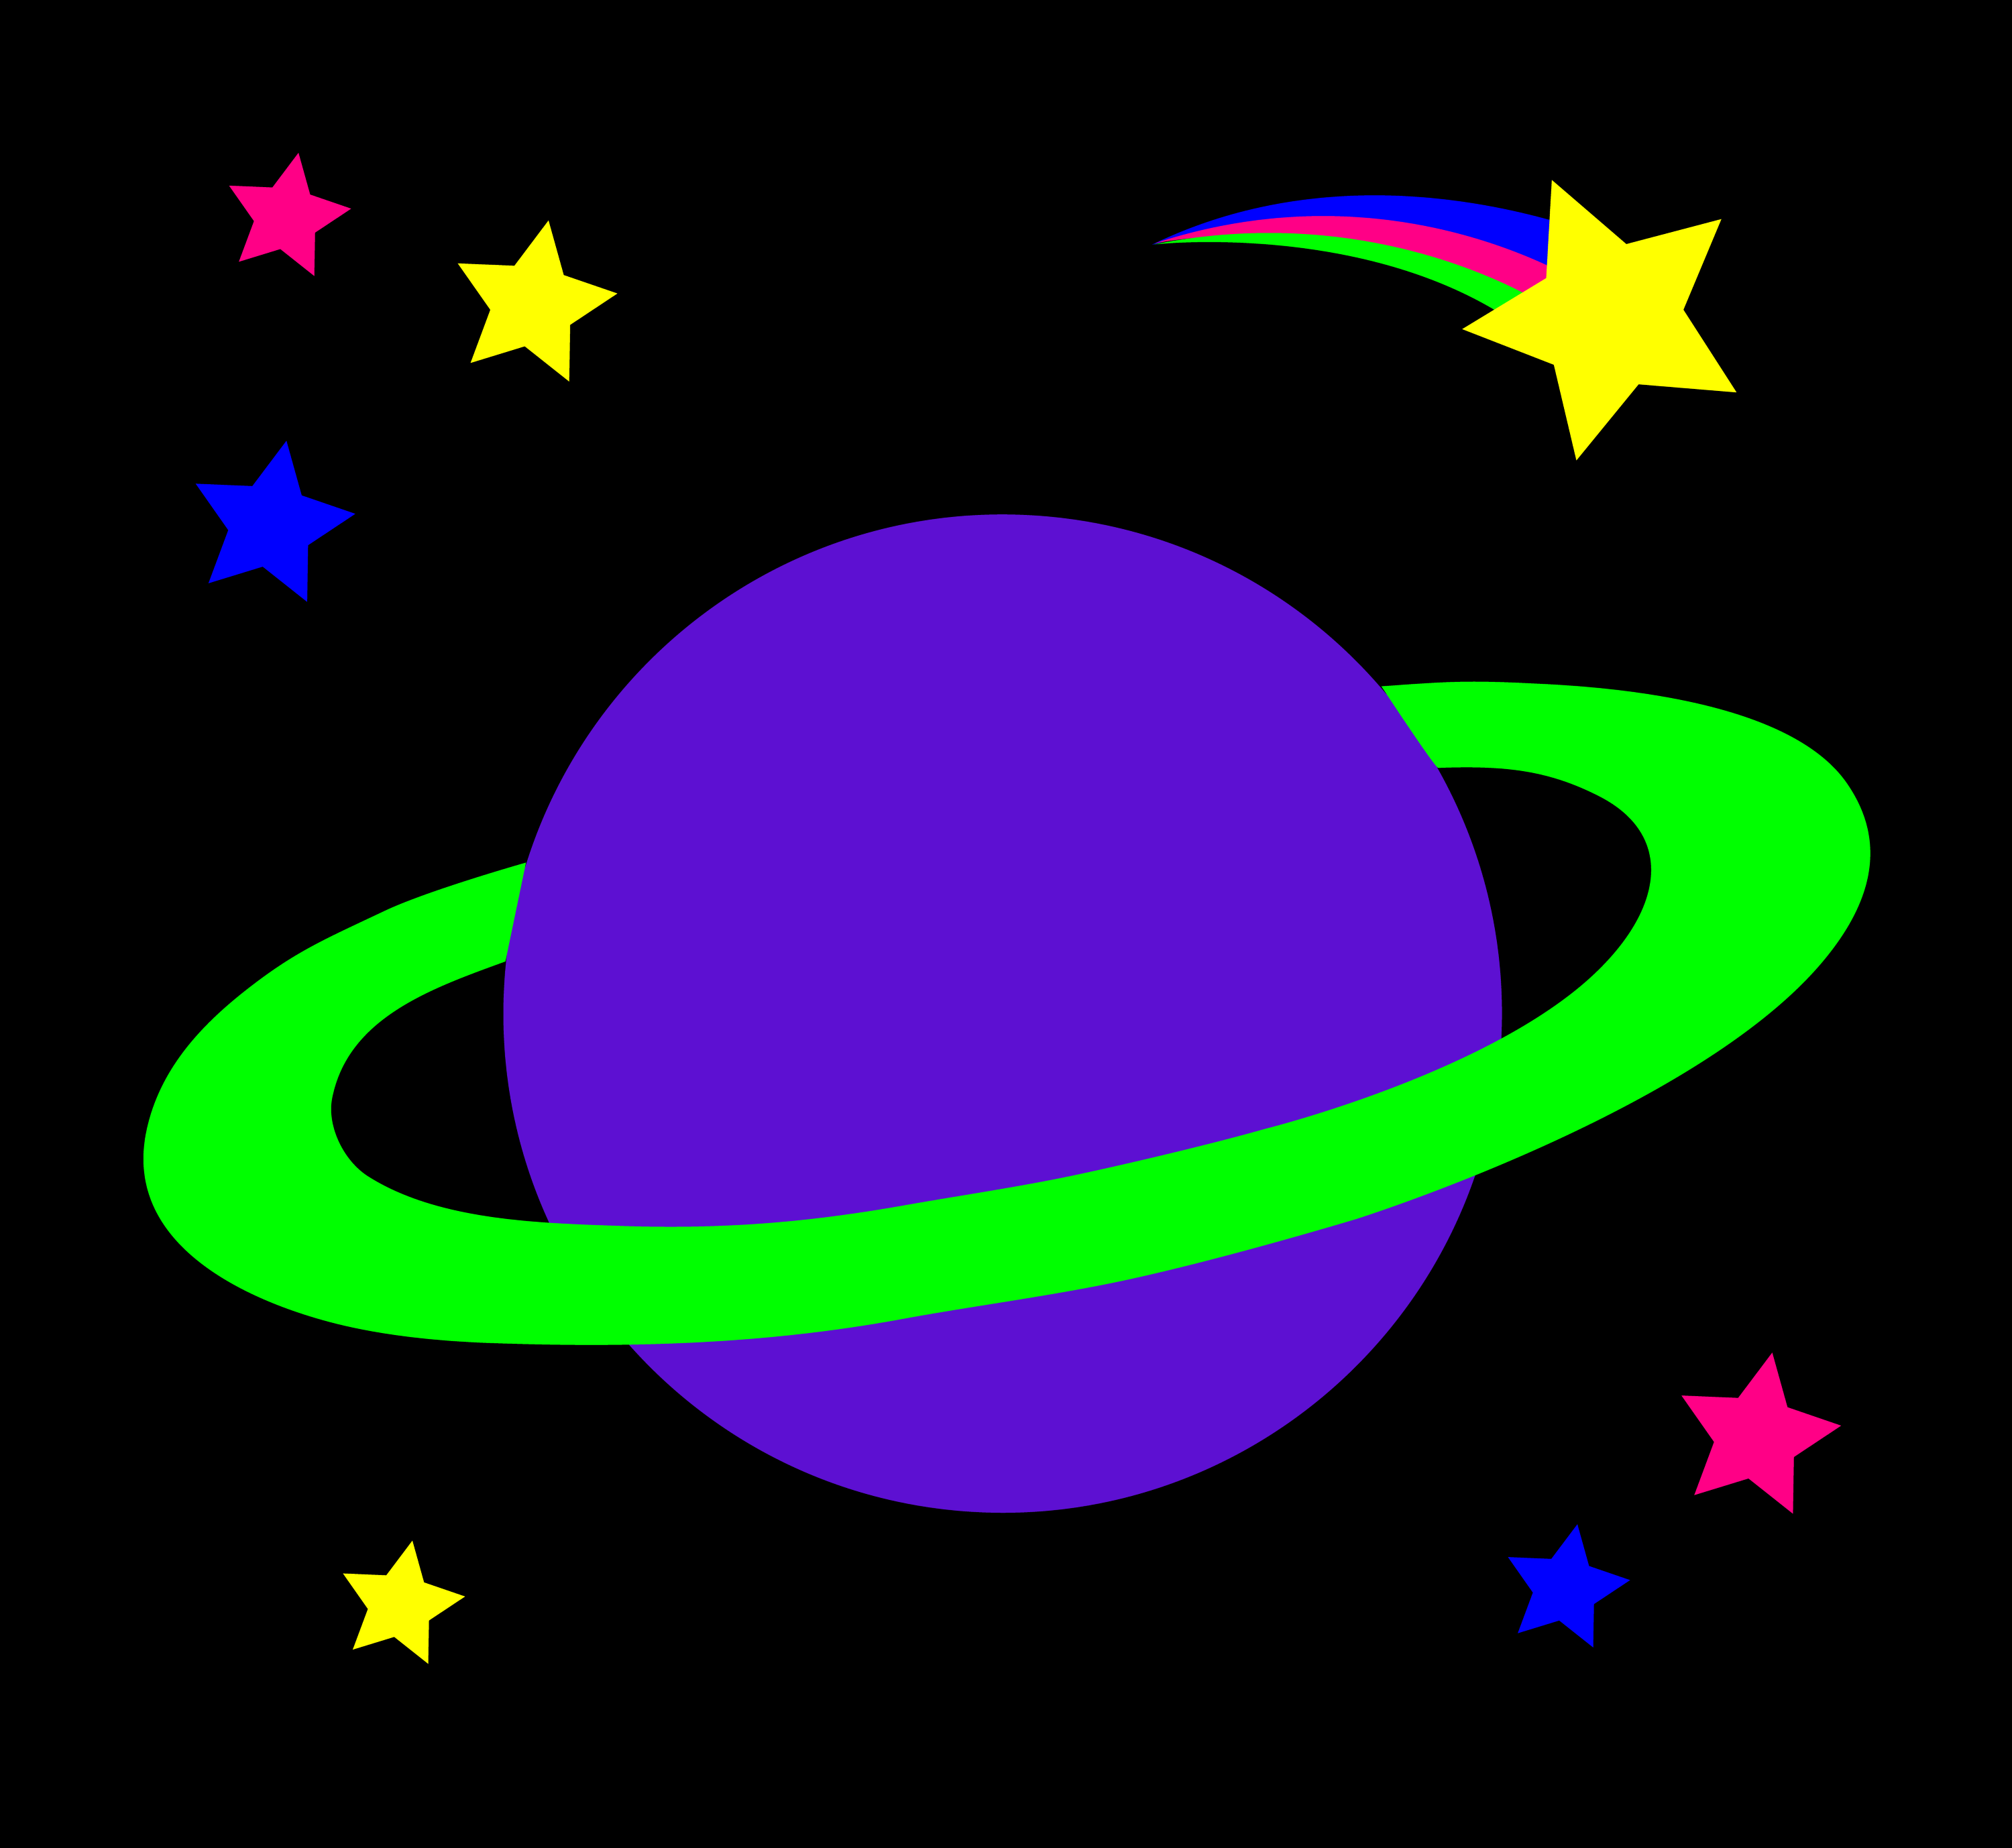 outer space clipart - photo #49